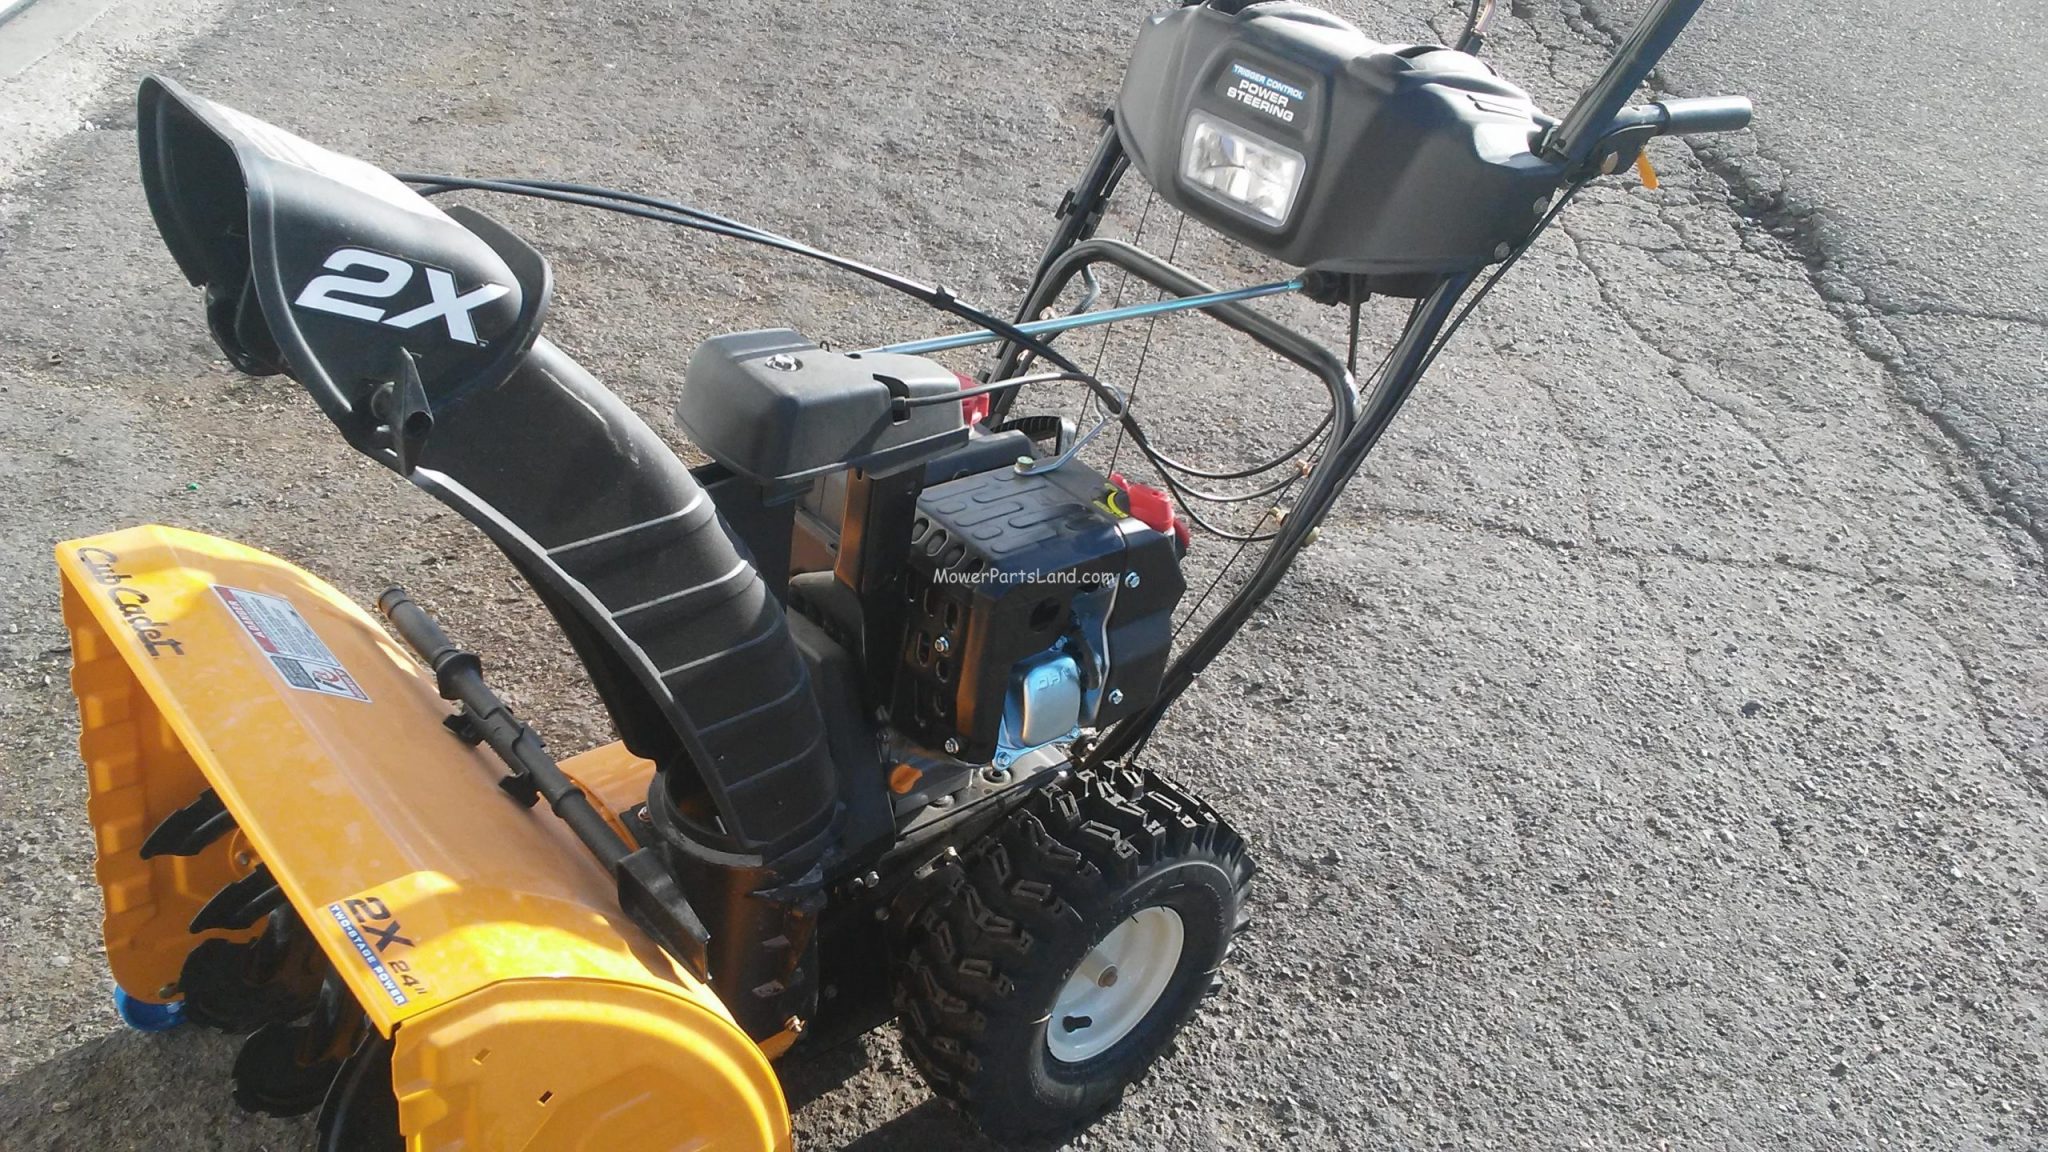 The installation of Cub Cadet Xt2 snow blower replacement parts